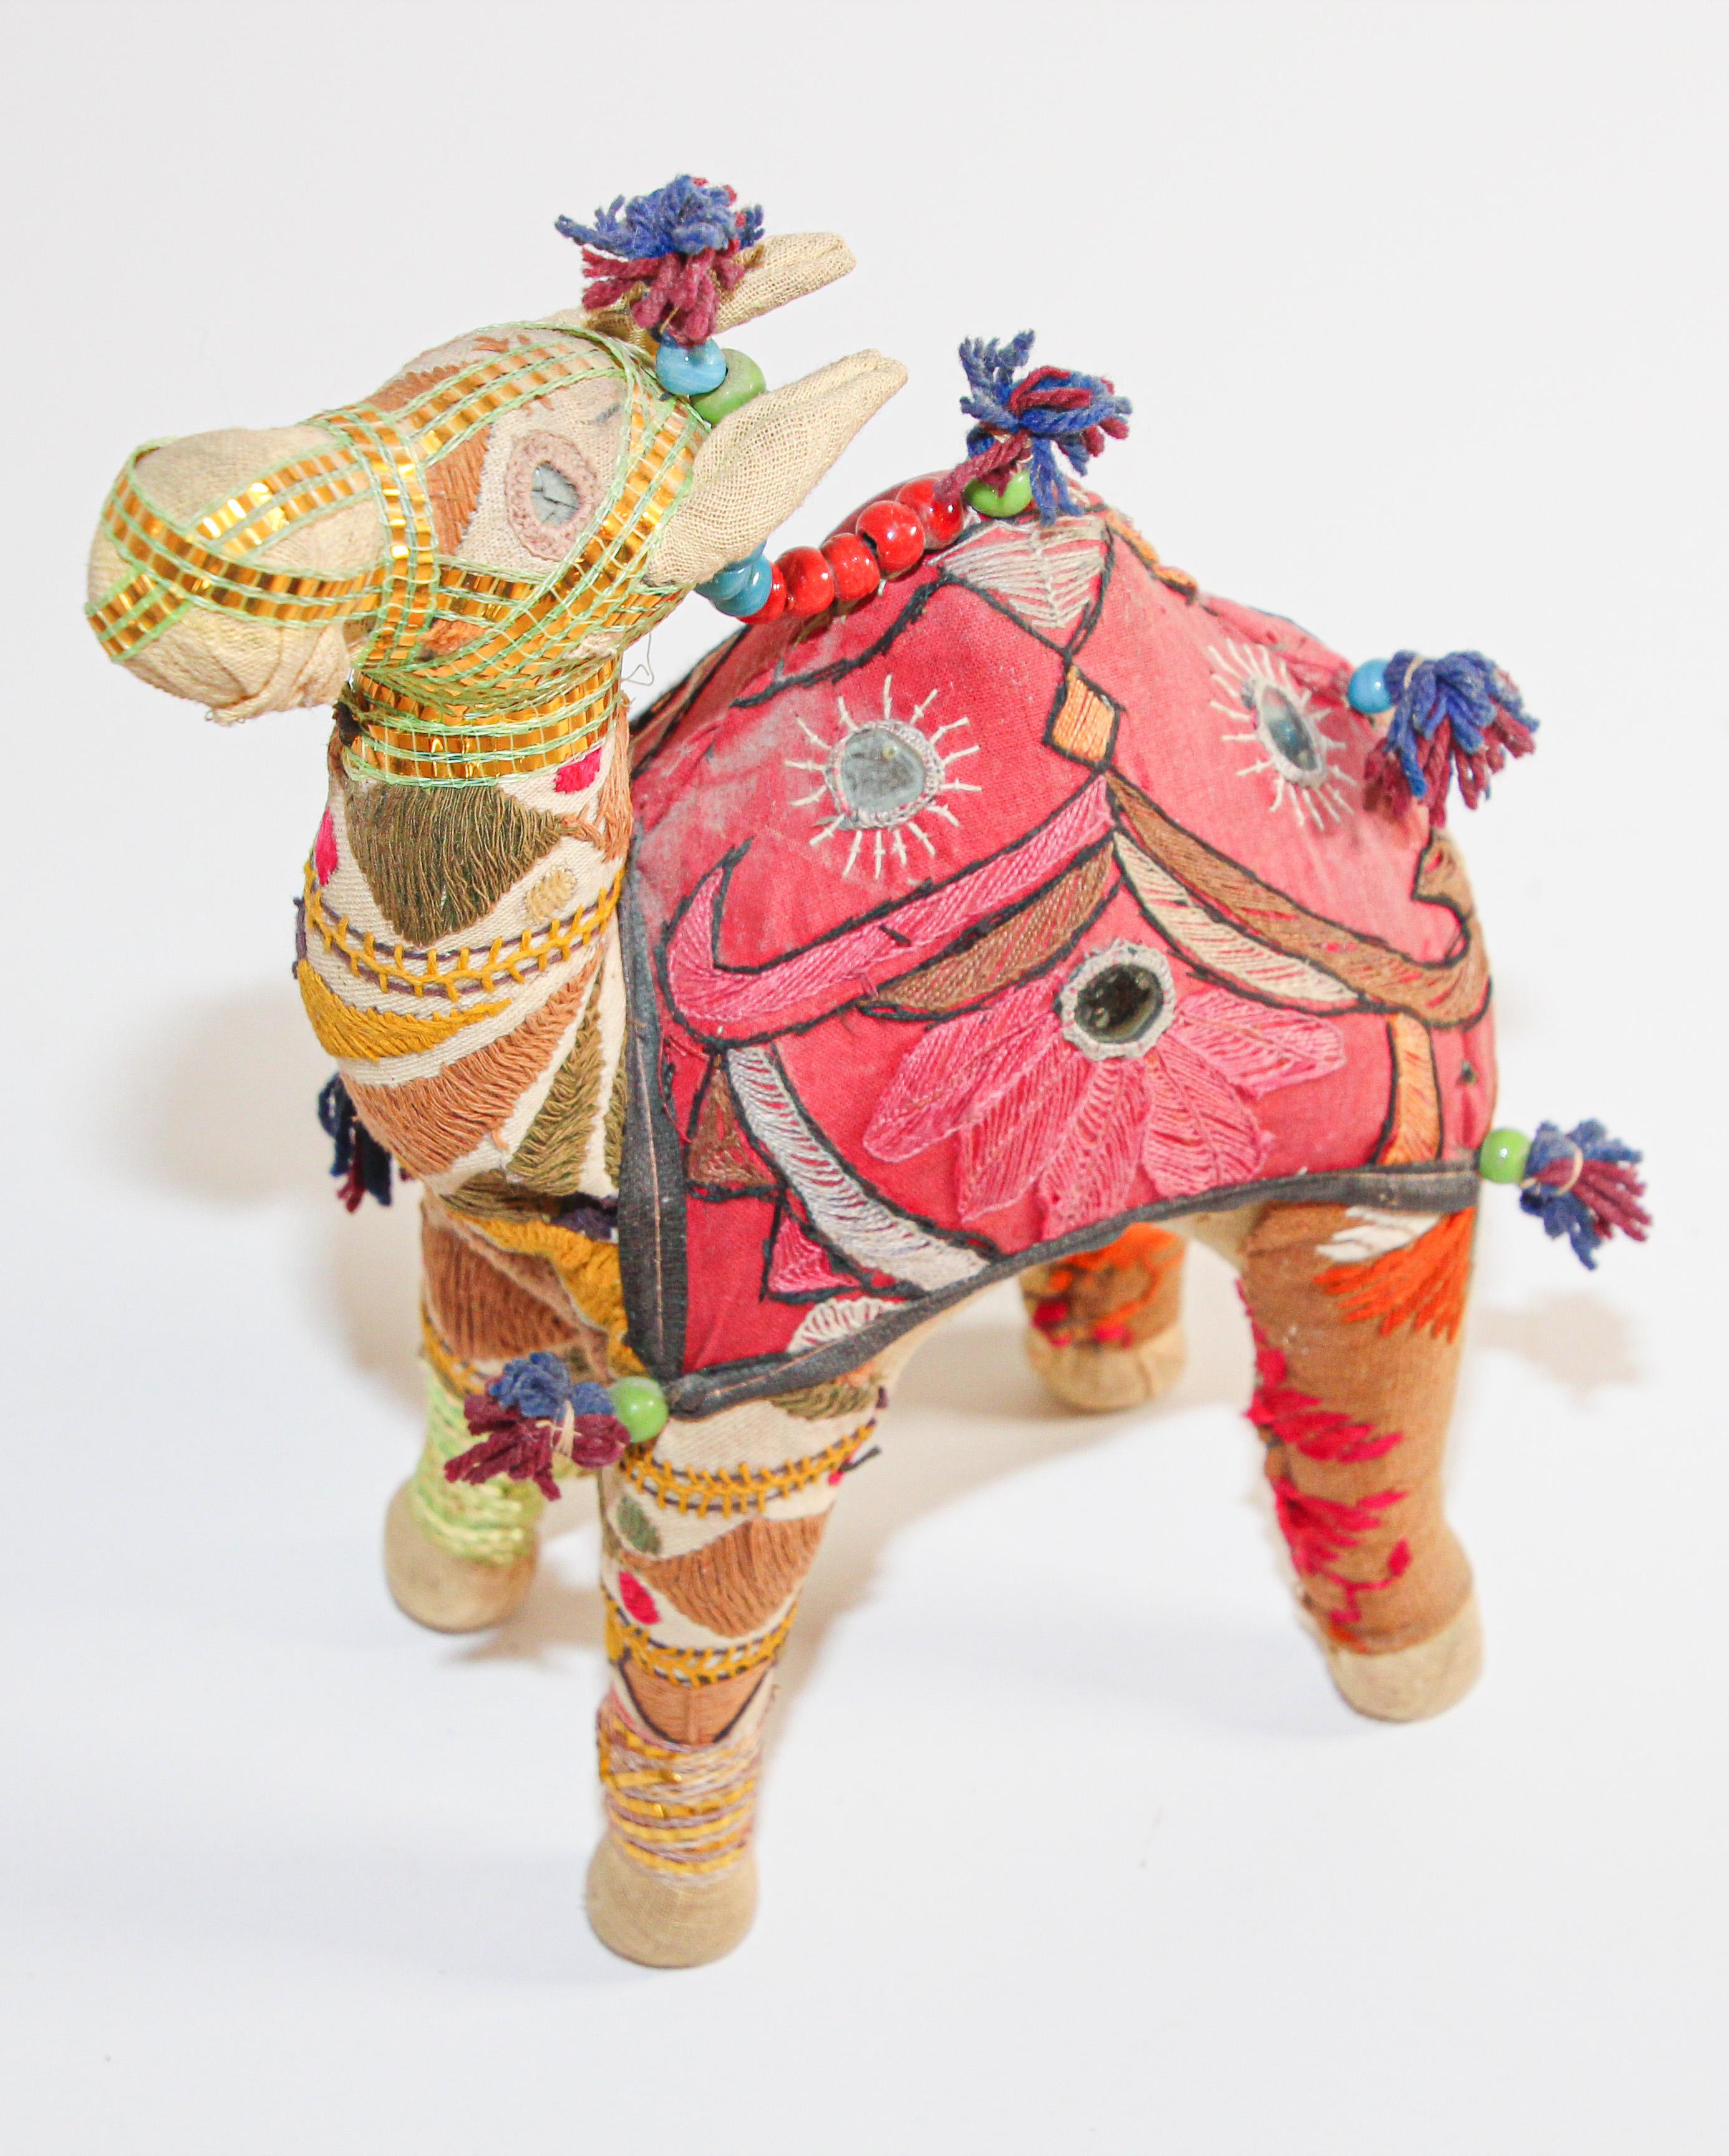 Anglo Raj Handcrafted Vintage Stuffed Cotton Embroidered Camel Toy, India, 1950